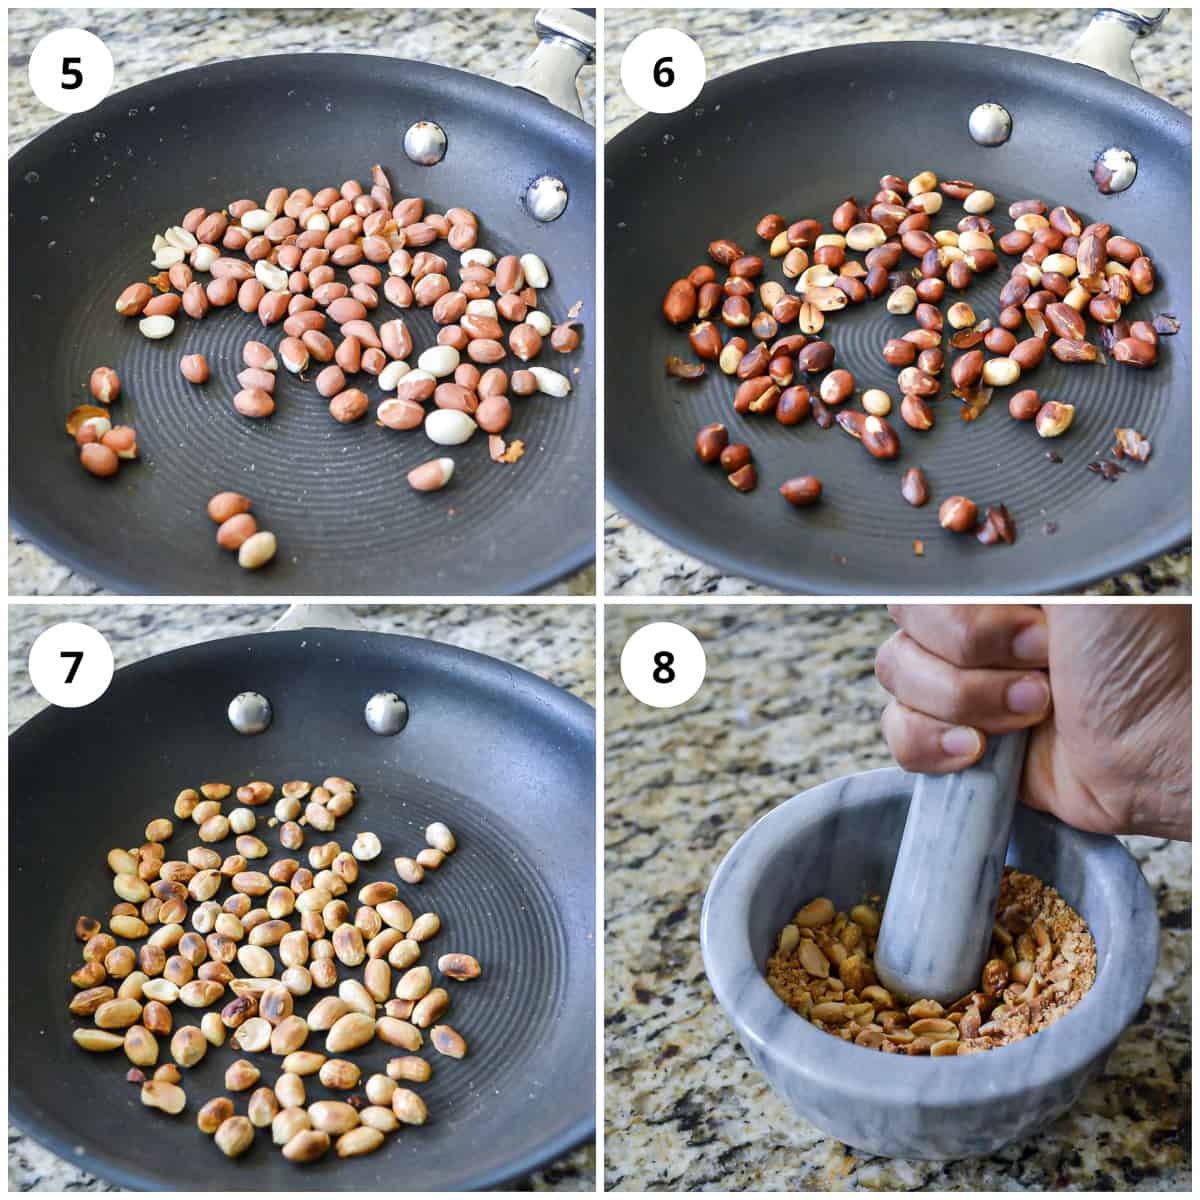 Roasting the peanuts in a frying pan and crushing them by hand in a pestle and mortar